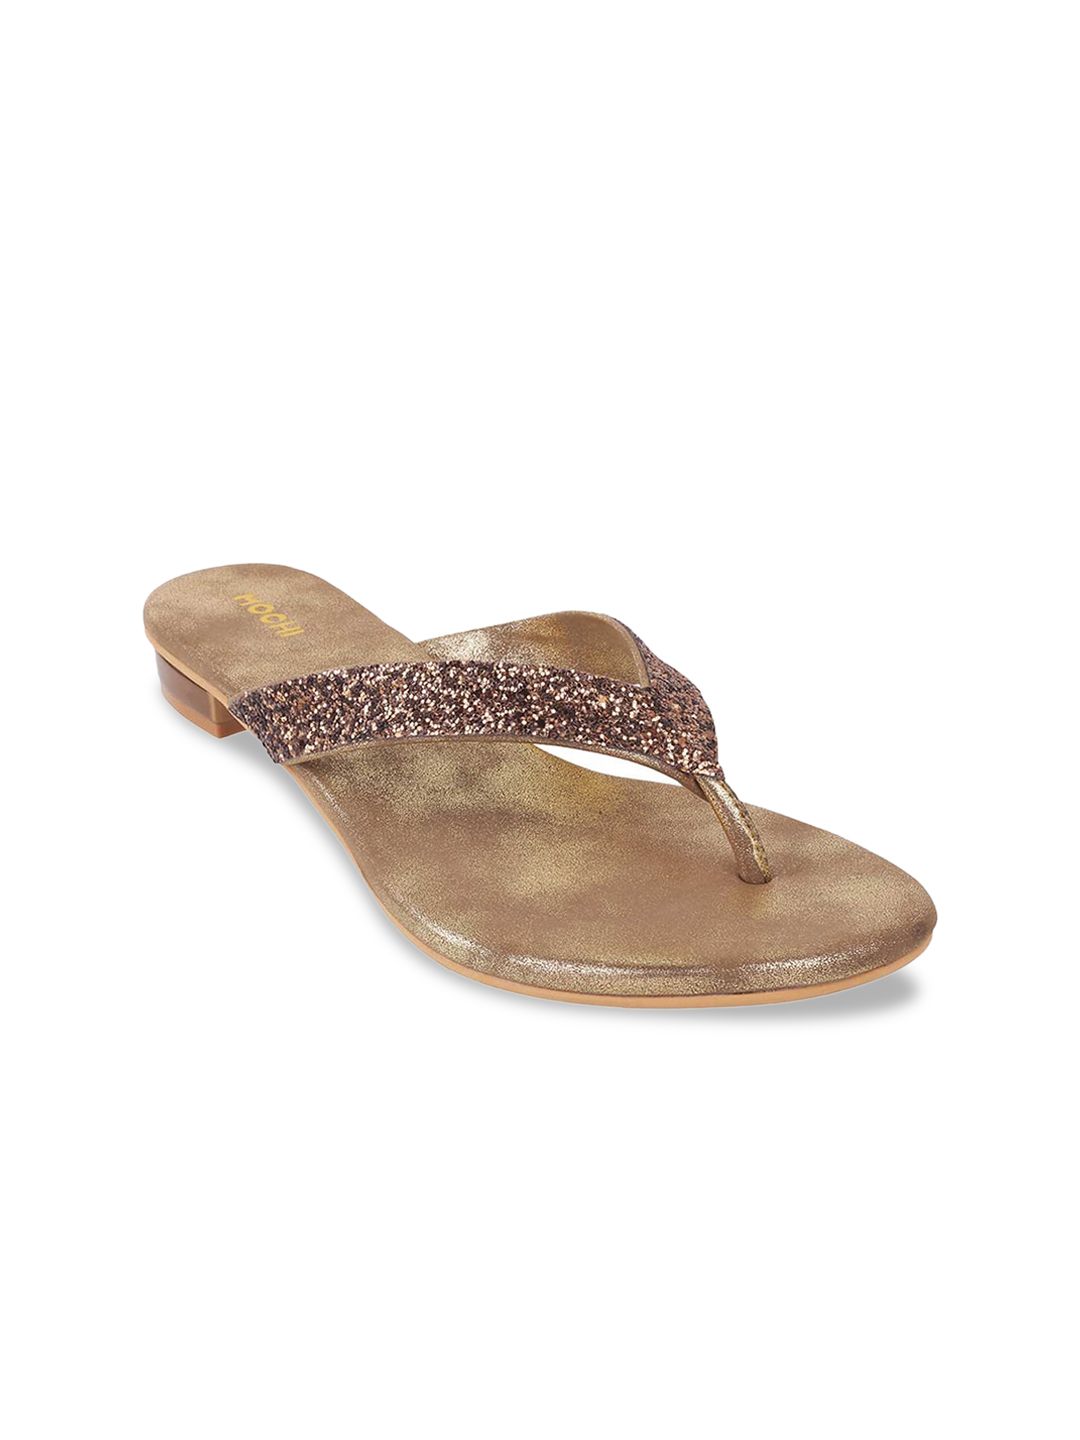 Mochi Women Gold Embellished Open Toe Flats Price in India